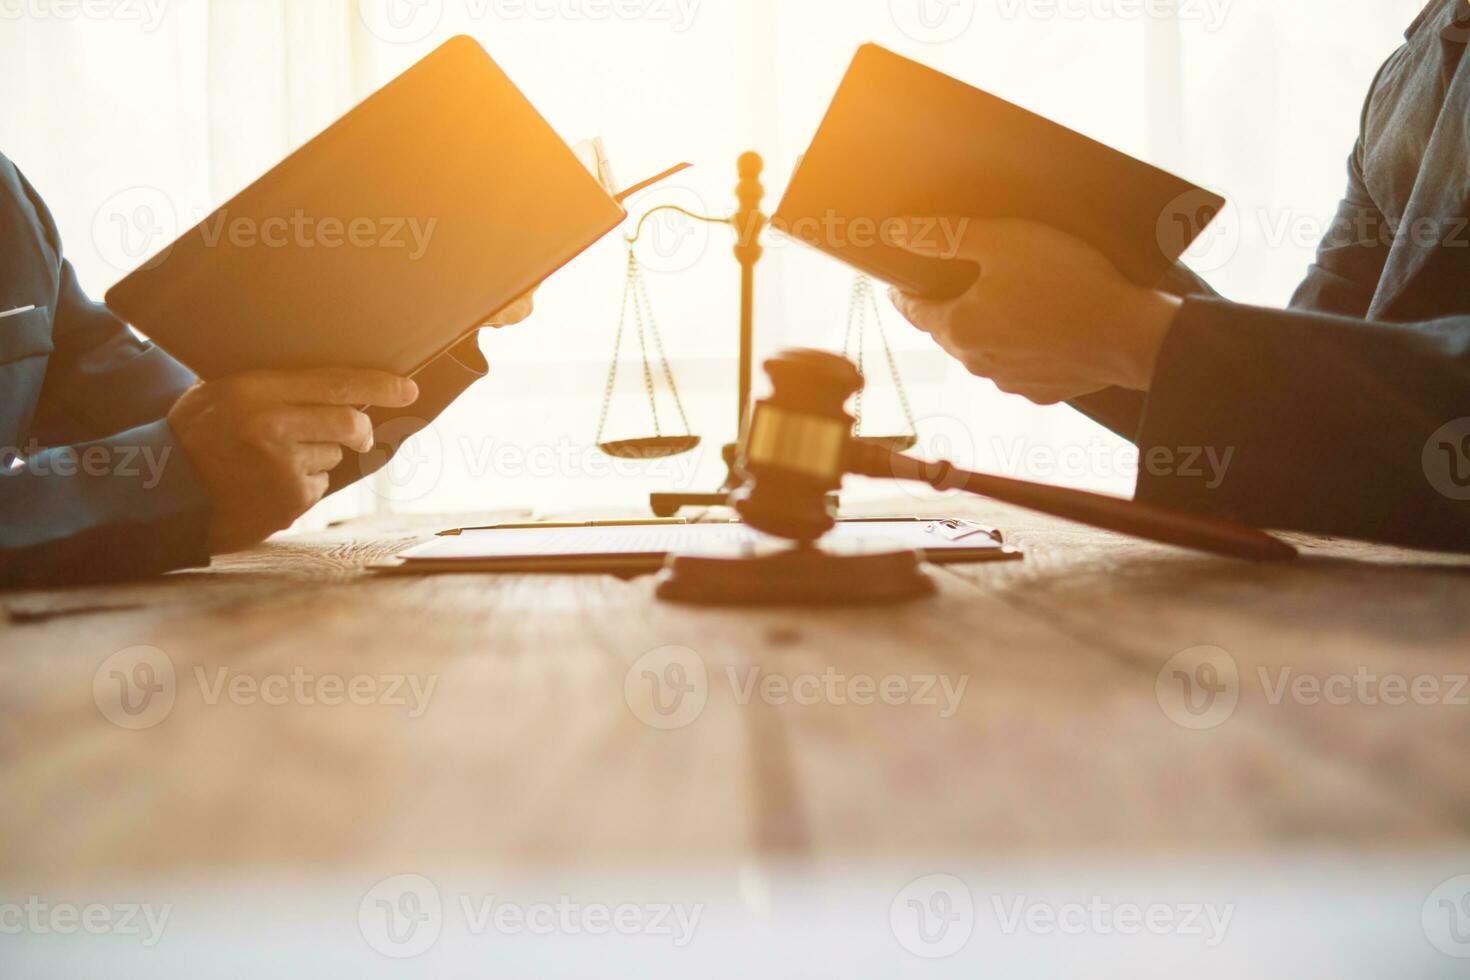 team of lawyers is reading legal revision of the law book to understand and learn the laws that affect their clients and will be able to advise clients who need legal advice. law book review concept photo